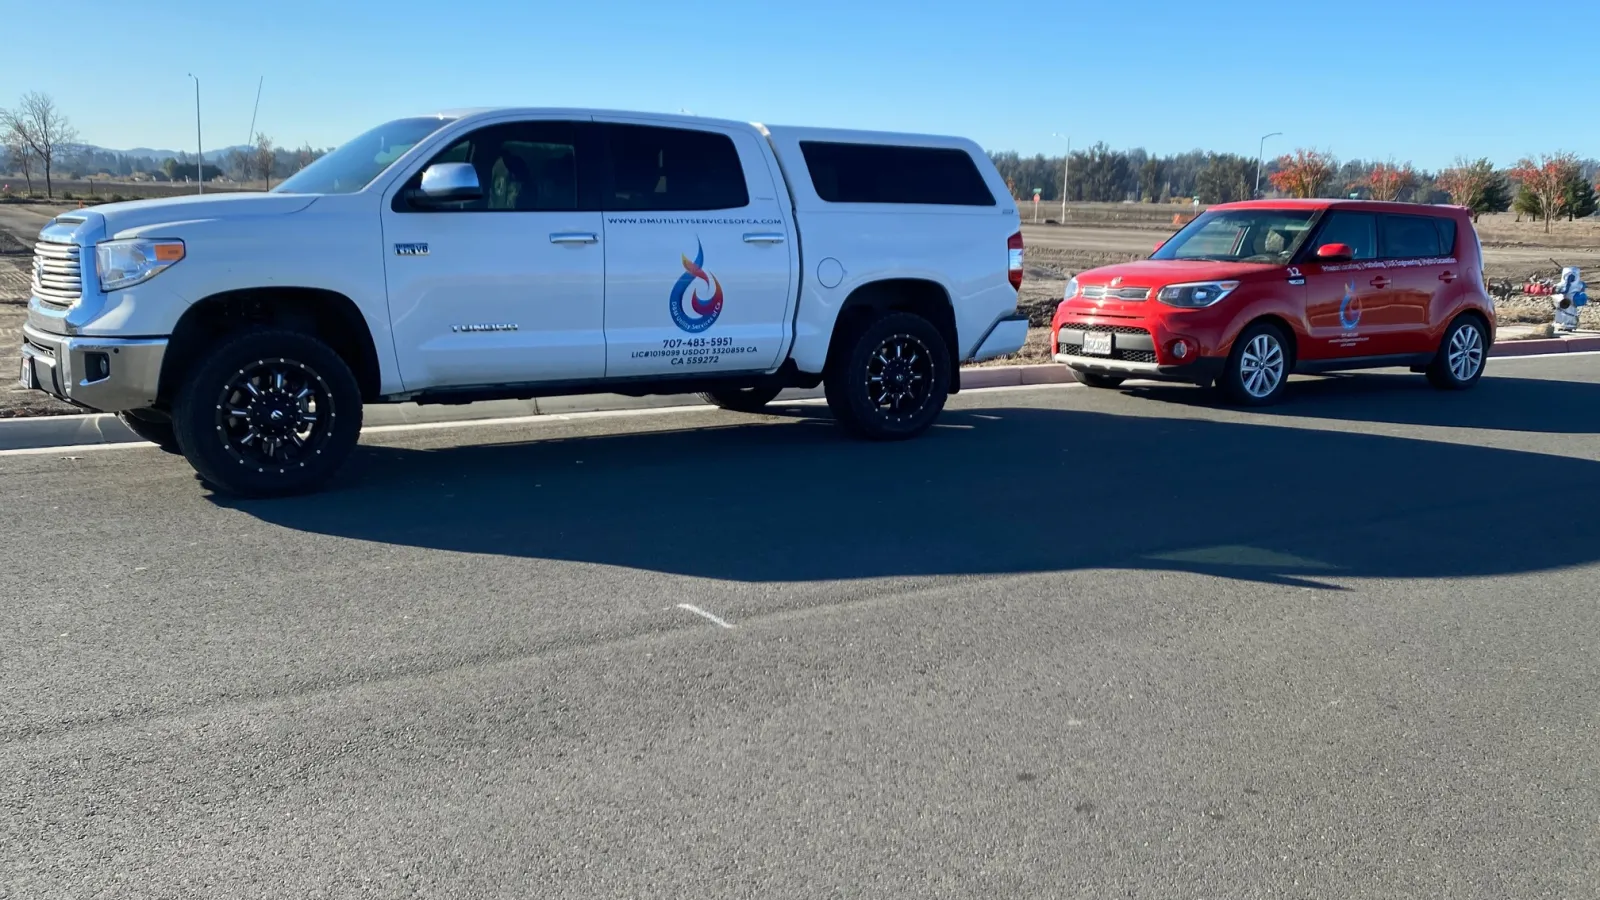 a white truck parked next to a red car